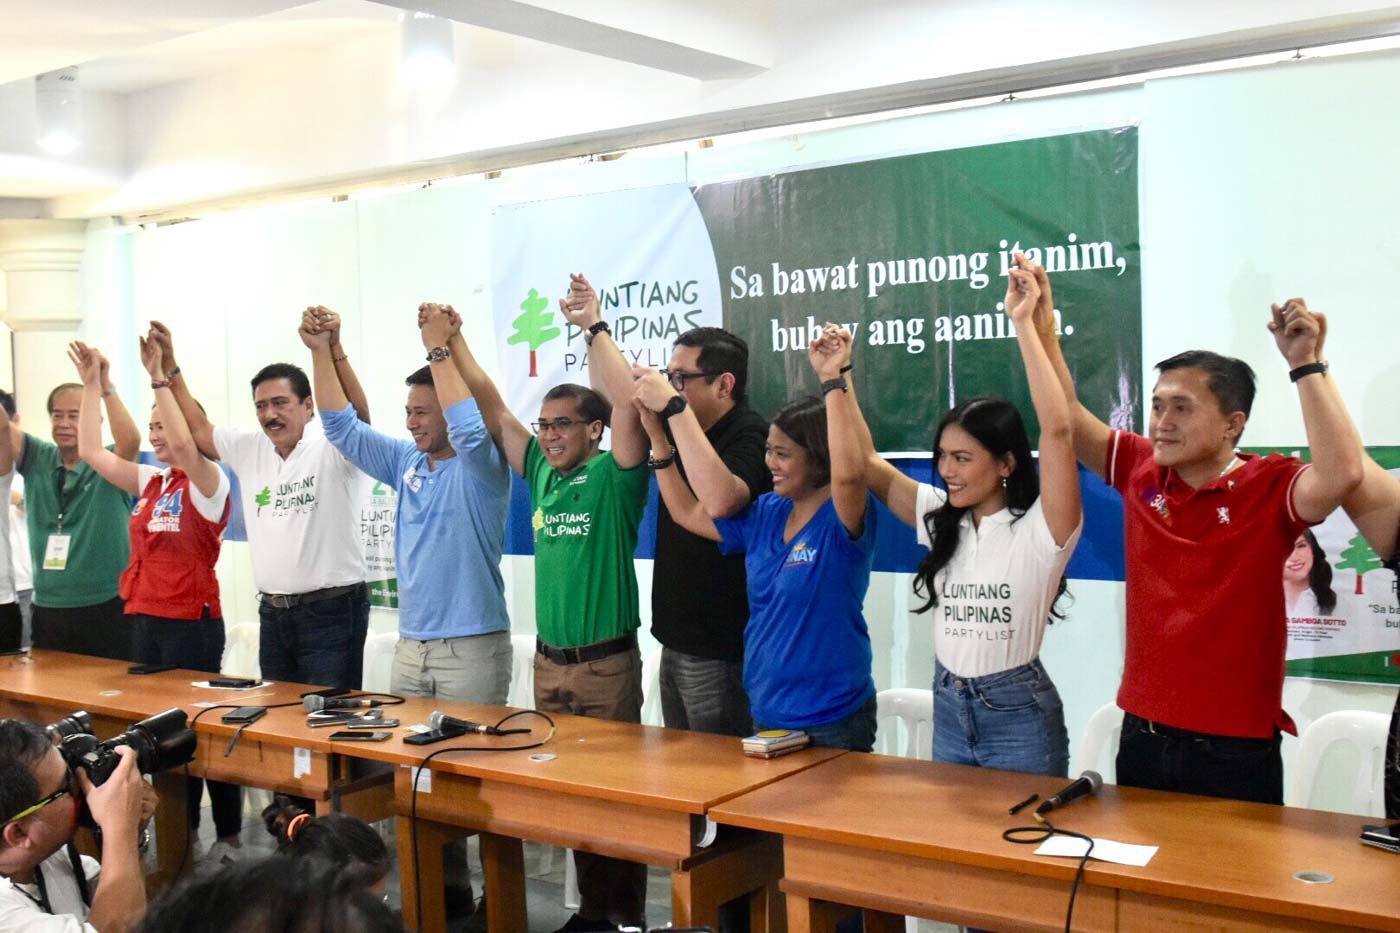 ENDORSEMENT. Senate President Vicente Sotto III (3rd from left) in Laguna with senatorial candidates and Luntiang Pilipinas party-list nominees on May 6, 2019. Photo by Angie de Silva/Rappler 